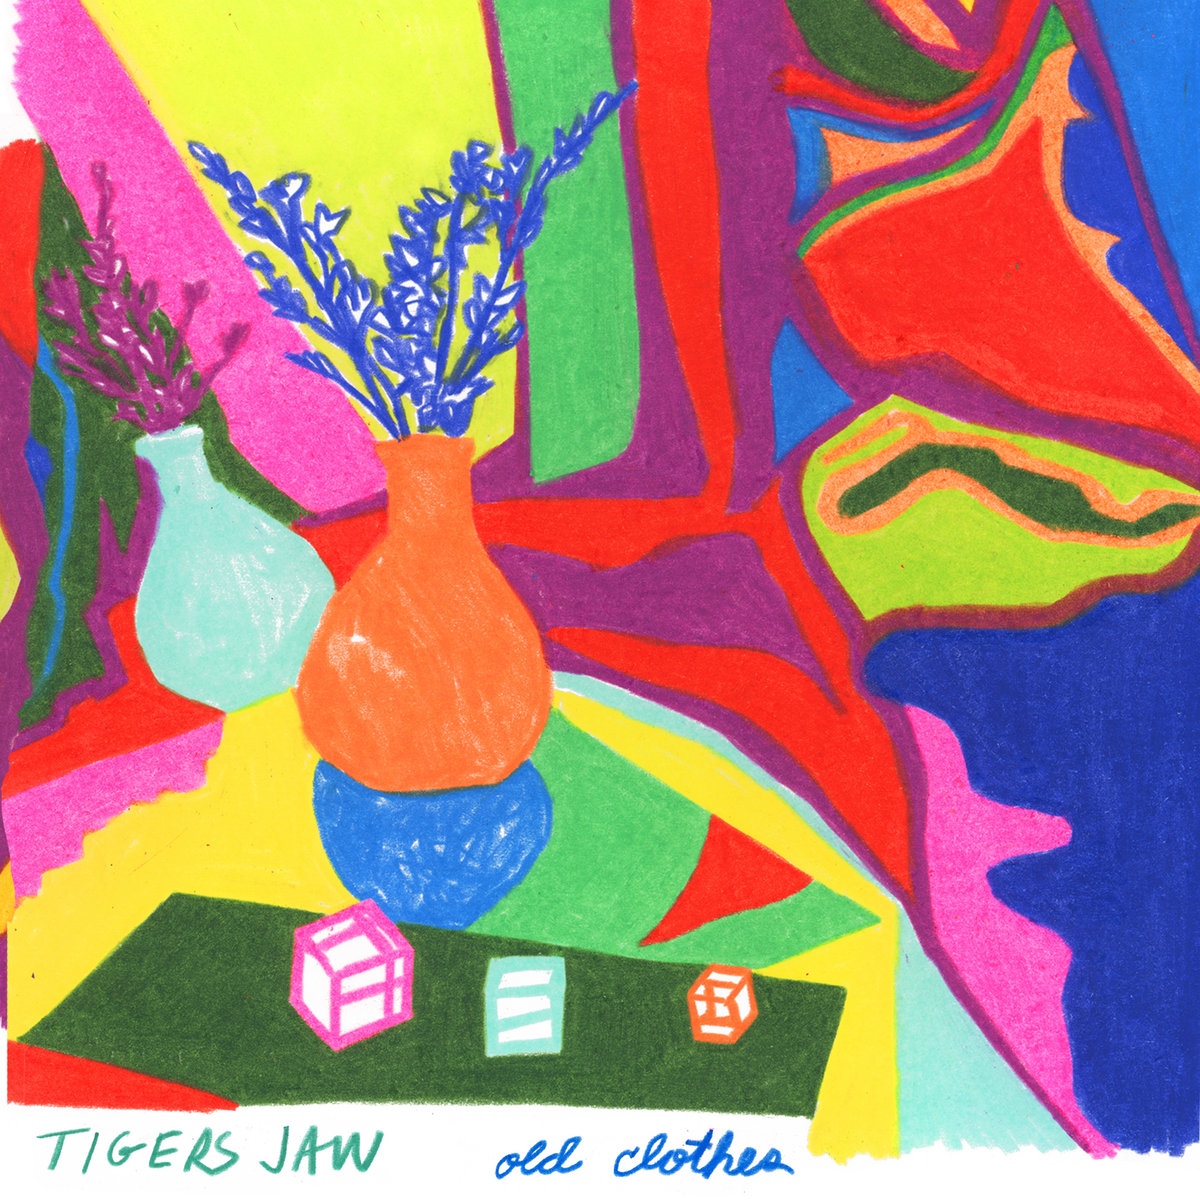 Tigers Jaw Old Clothes cover artwork